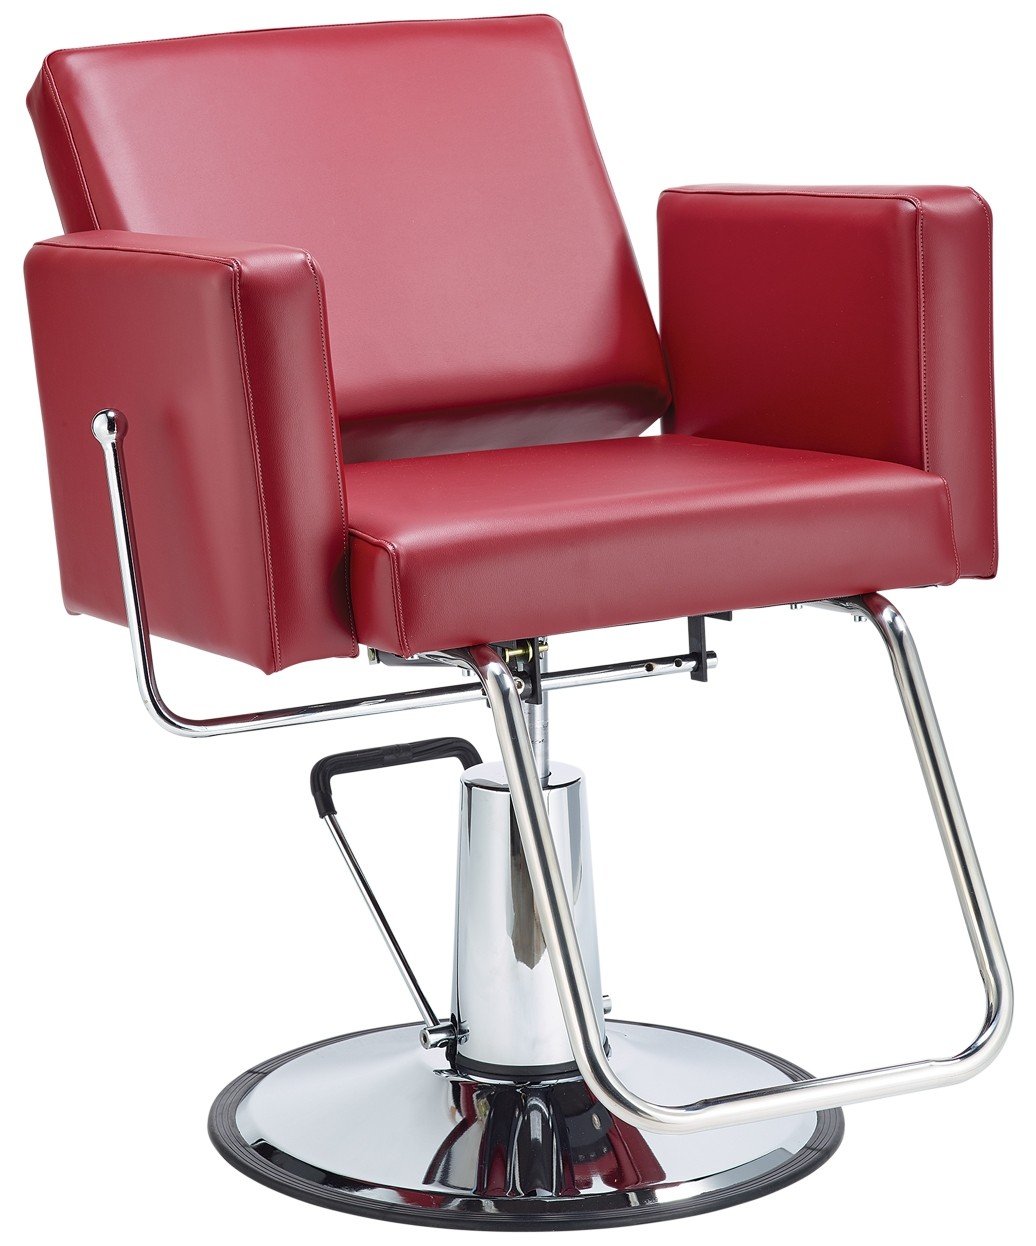 Pibbs 3446 Cosmo All Purpose Chair